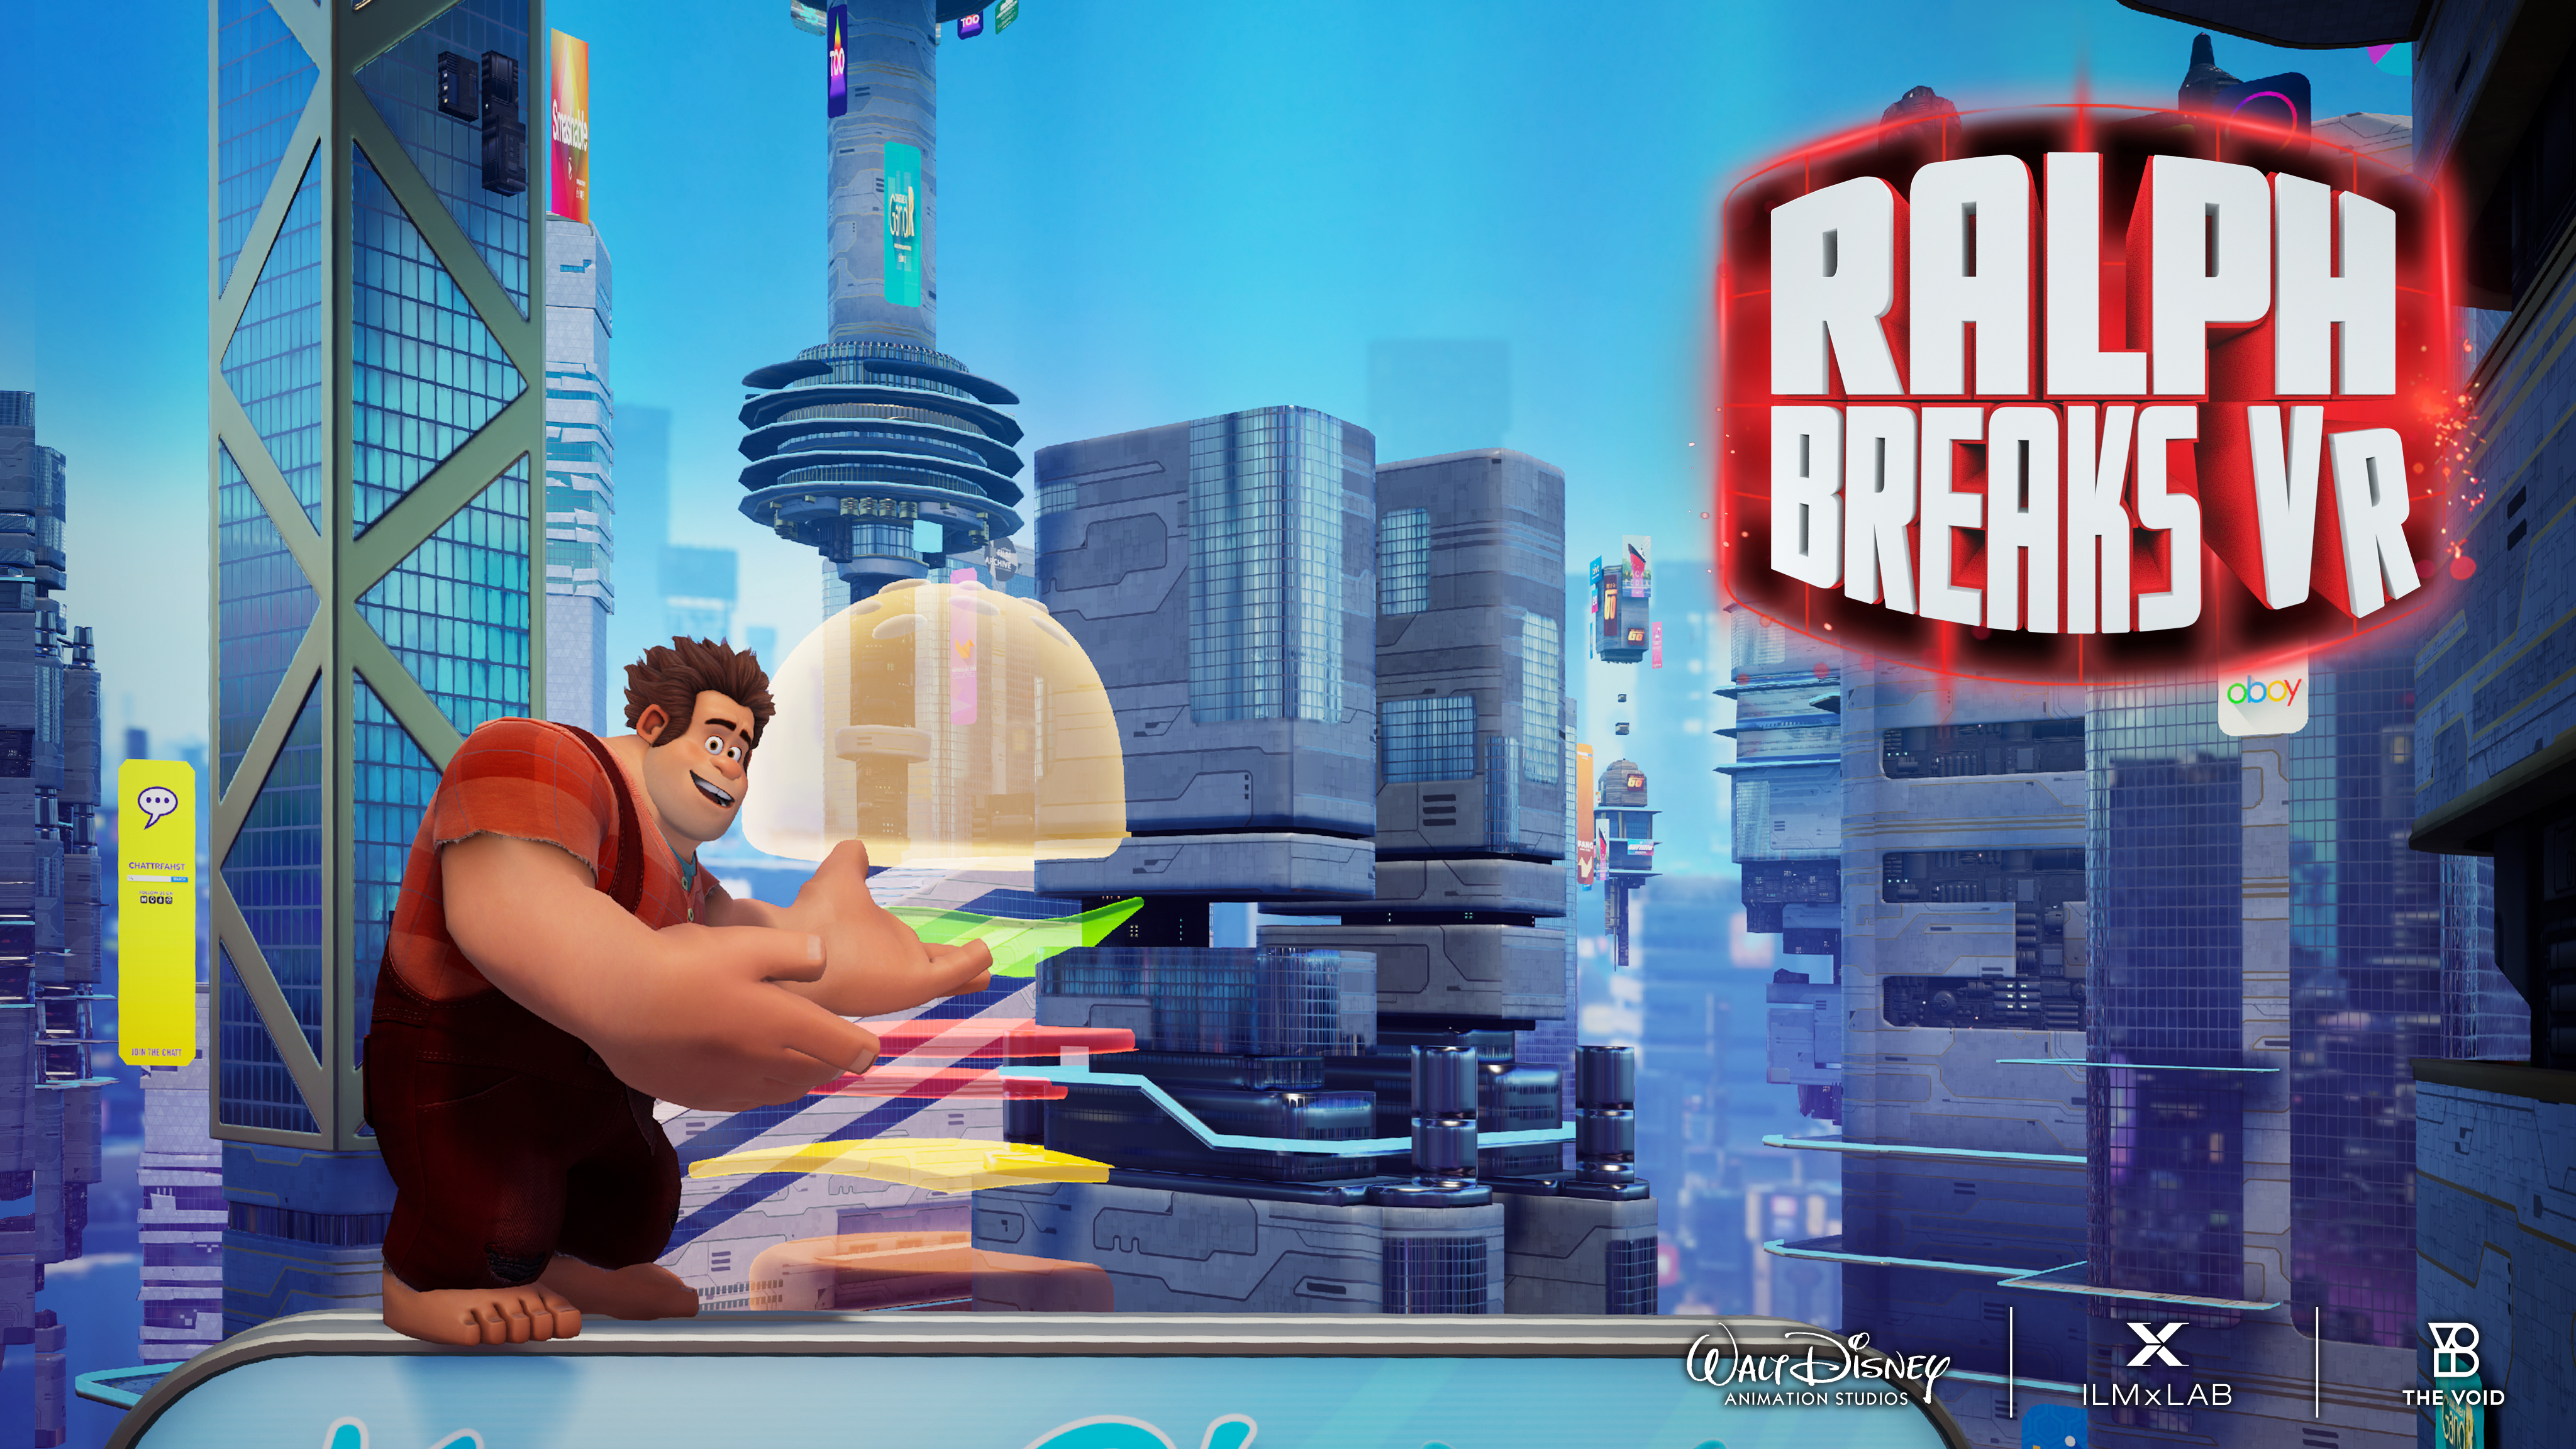 Ralph Breaks Vr Tickets Now Available For Disney Springs And Downtown Disney Mickeyblog Com